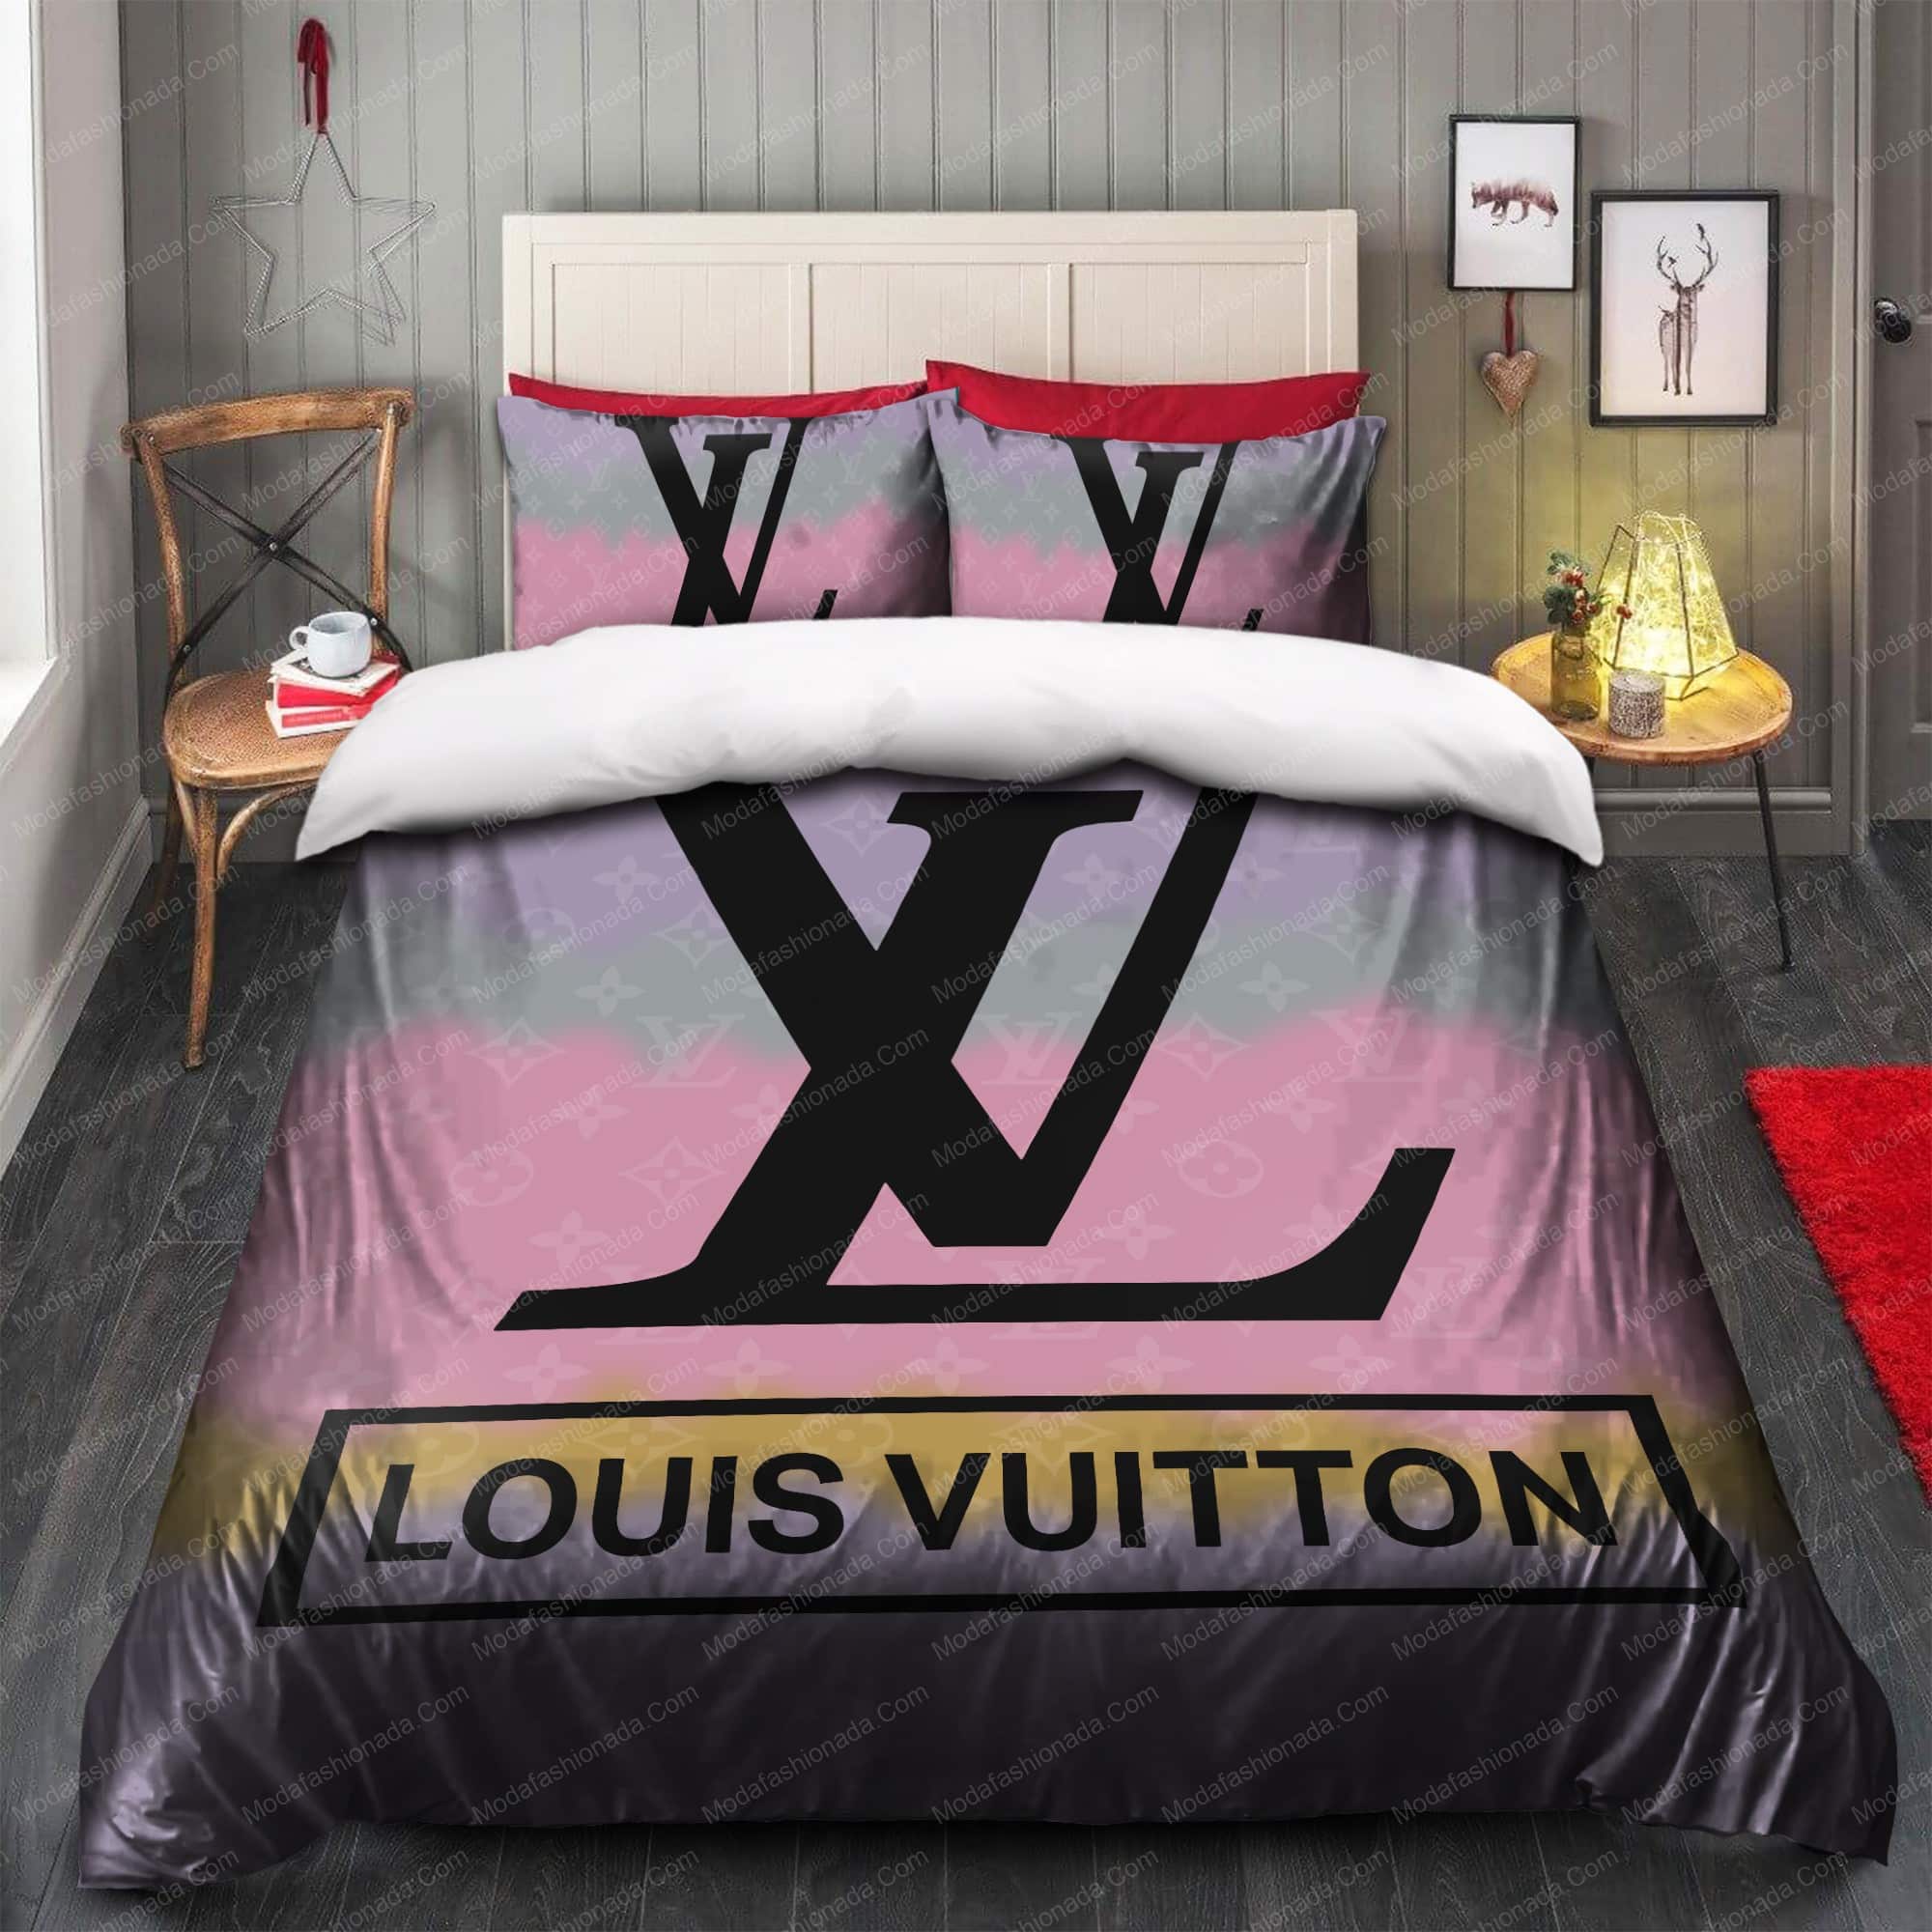 Luxury Lv Bedding Set 1 Duvet Cover And 2 Pillow Covers